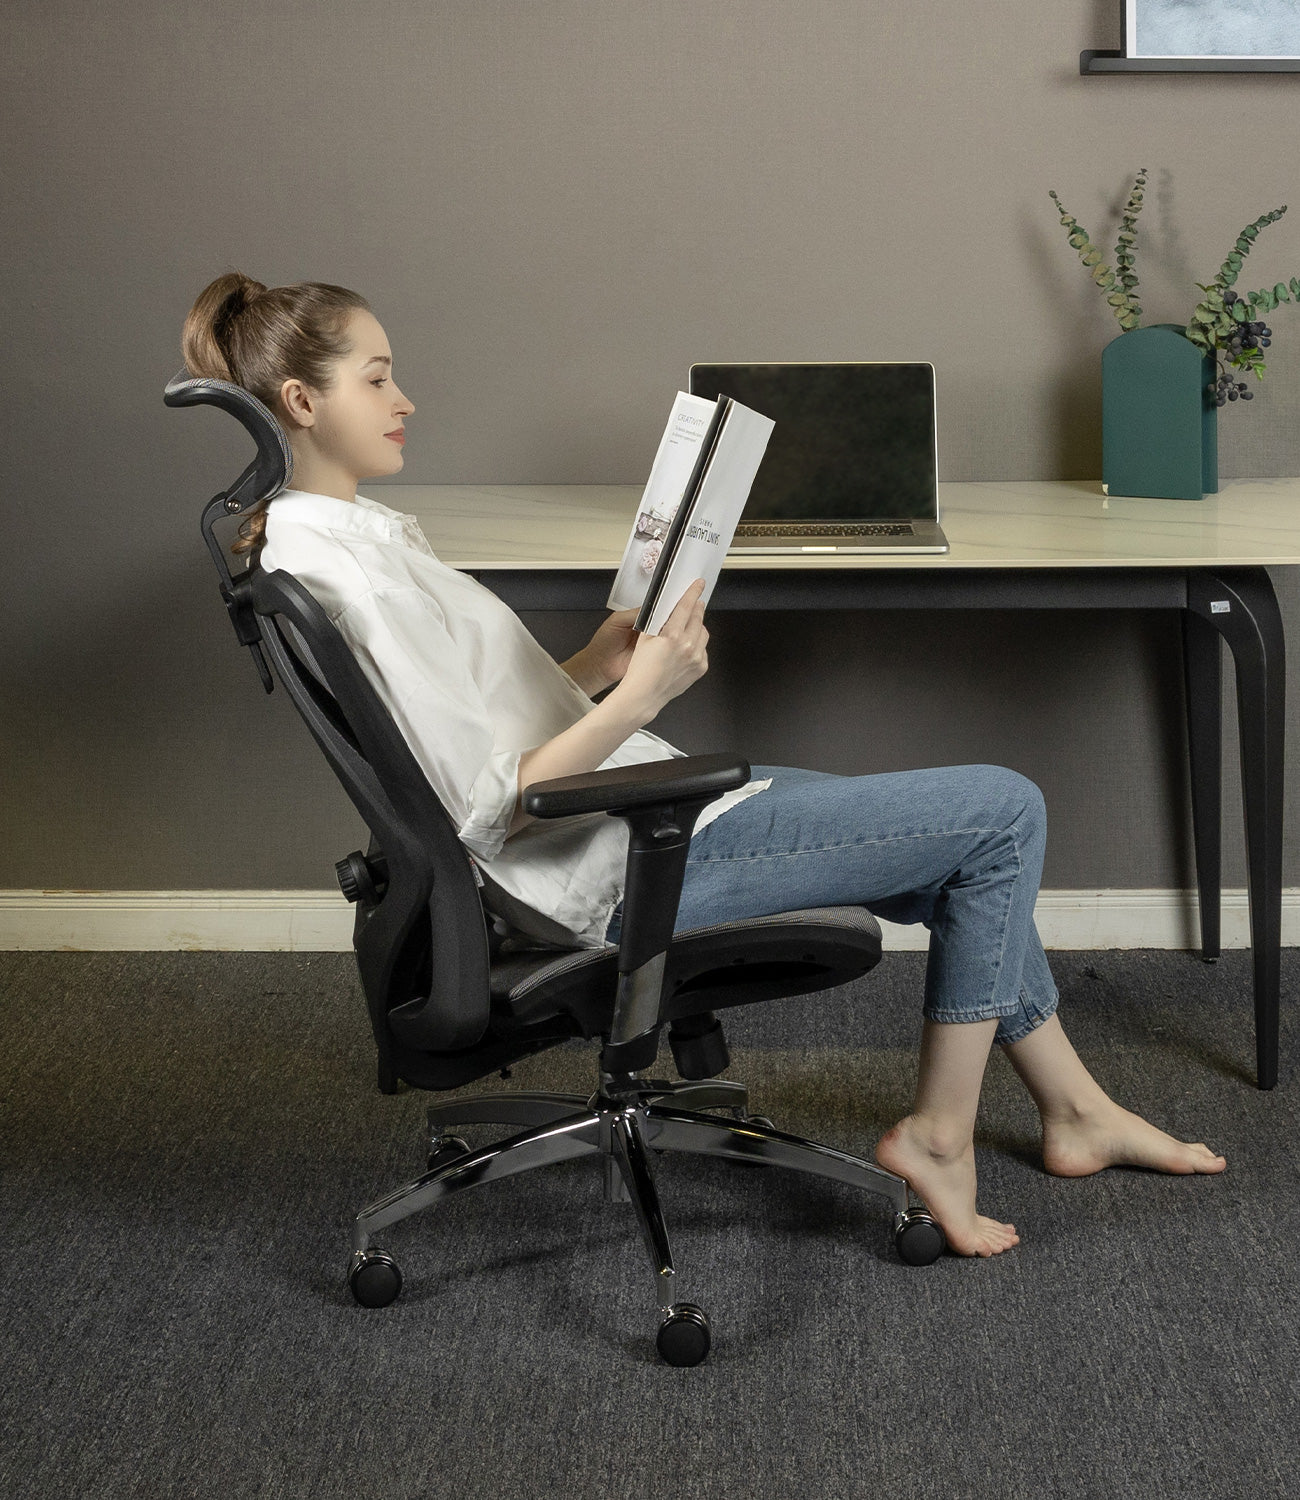 SIHOO M57 Ergonomic Office Chair with 3 Way Armrests UK